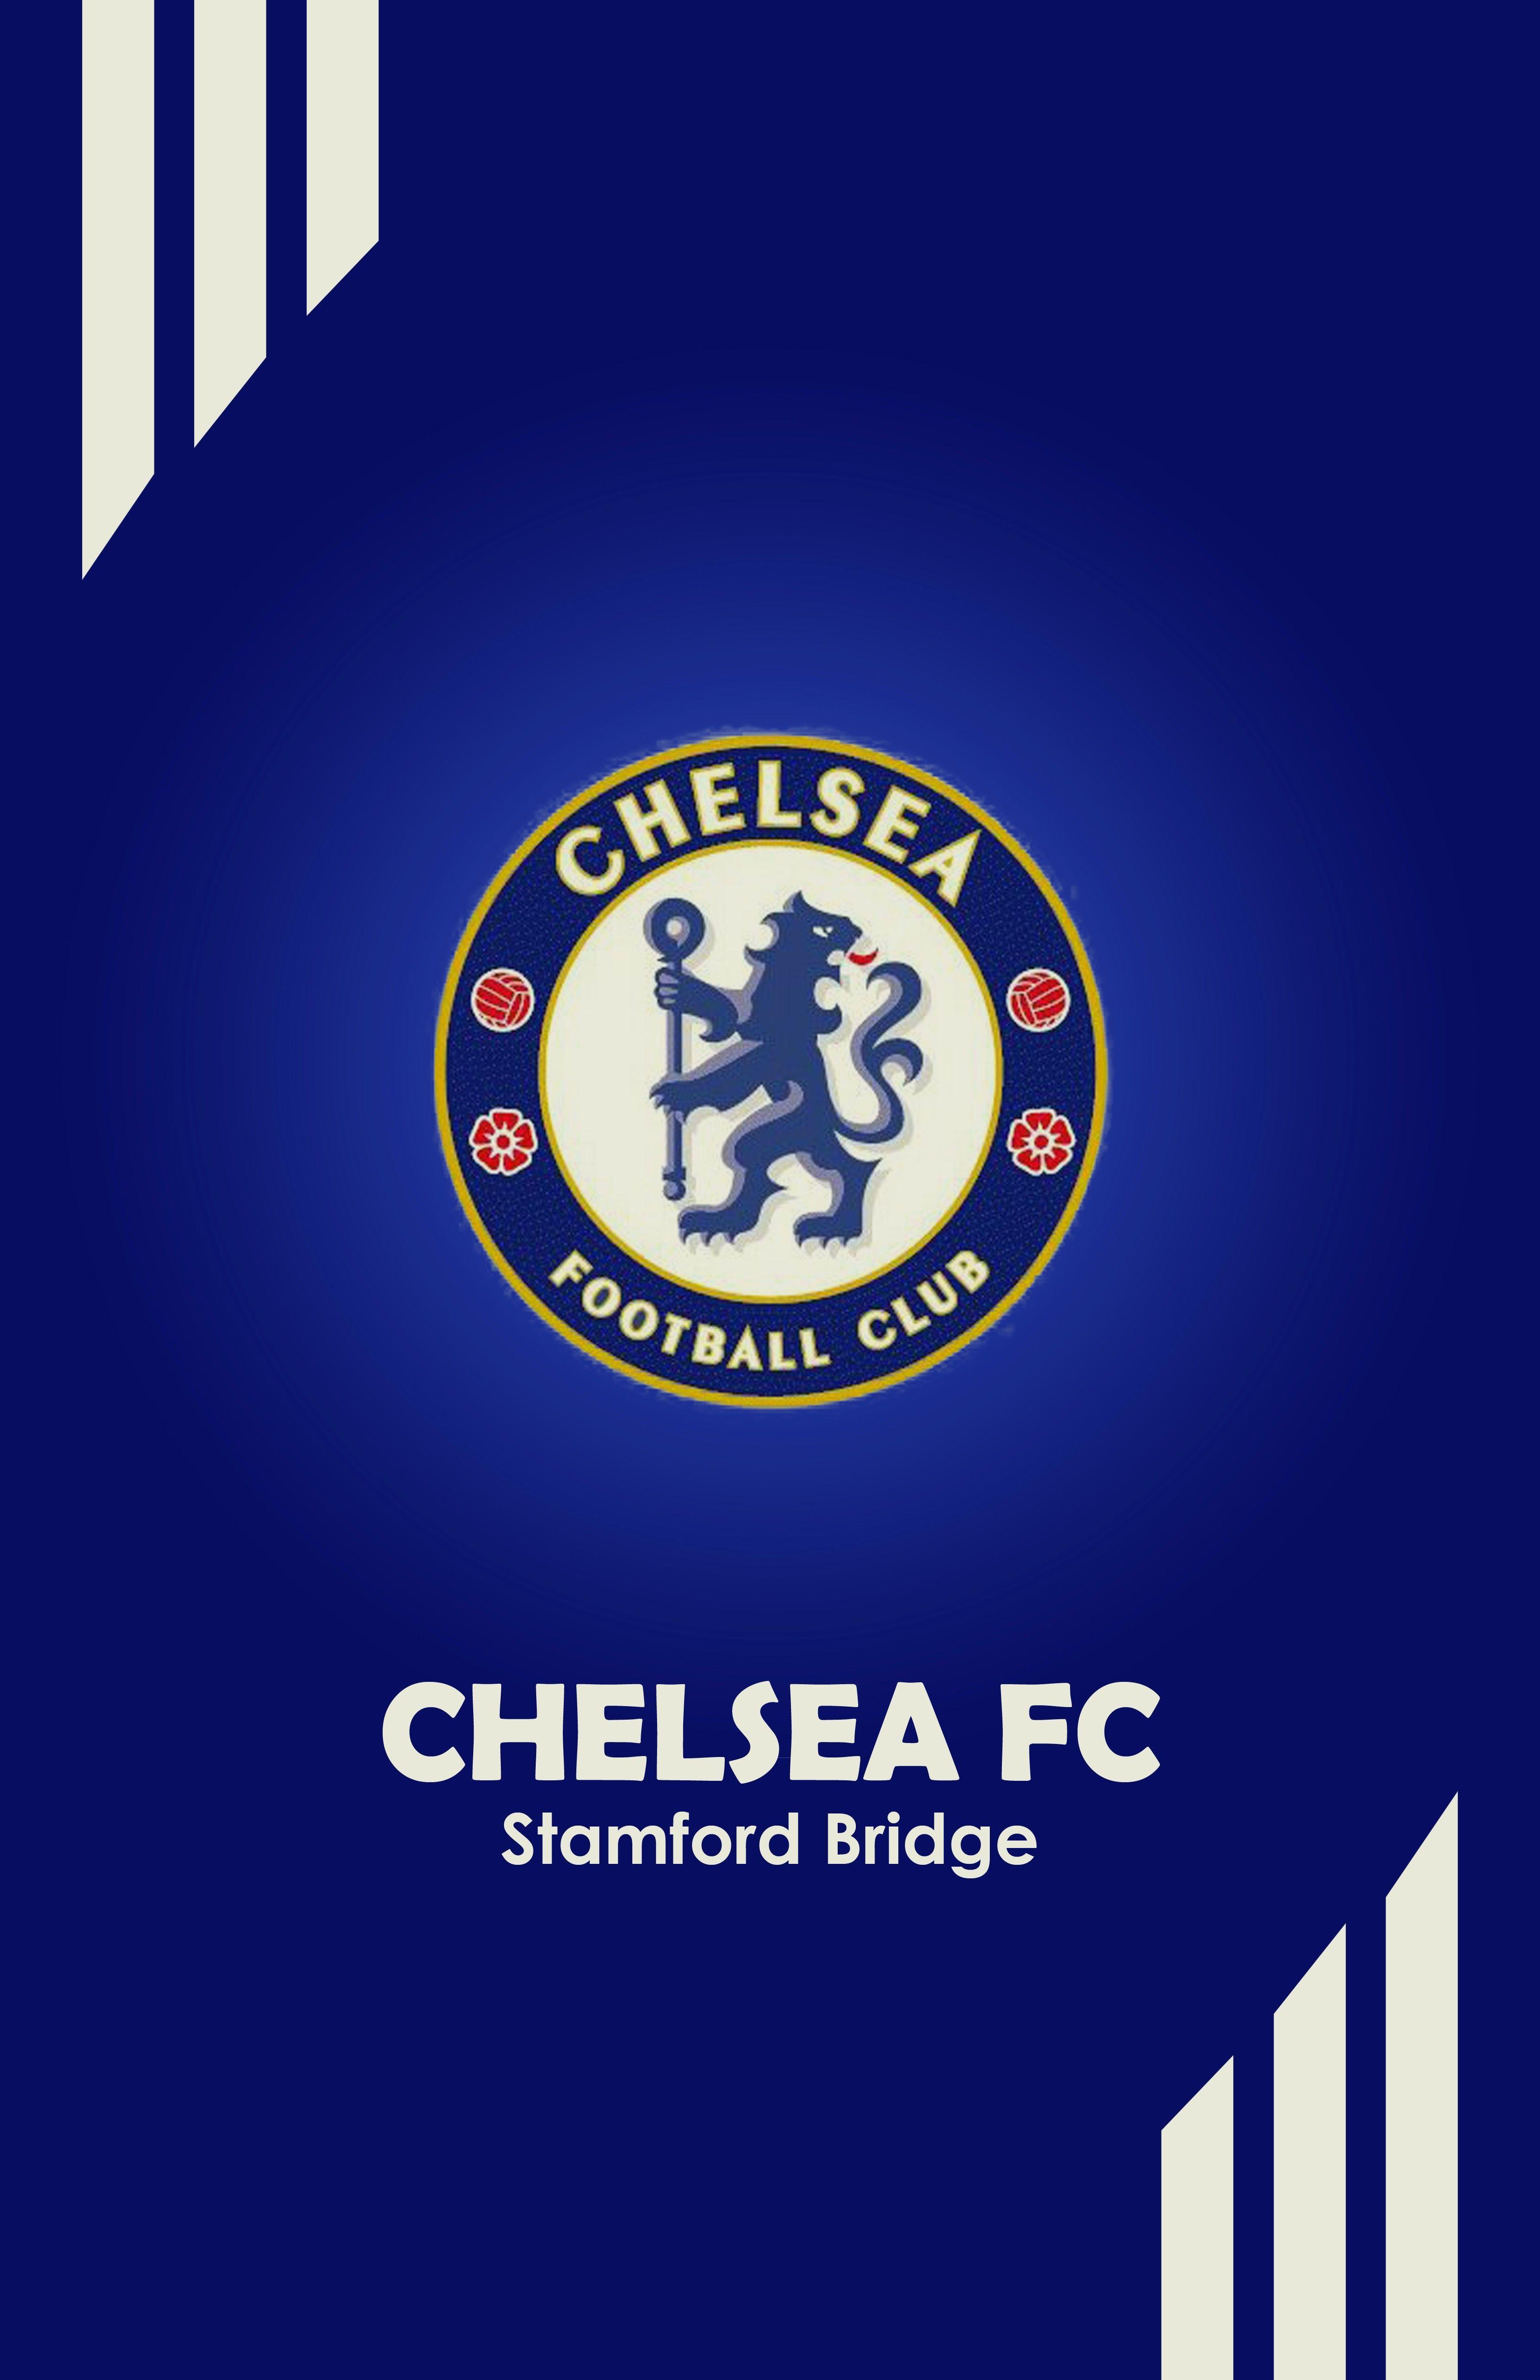 Wallpaper Chelsea Fc Android. COOL WALLPAPER HD